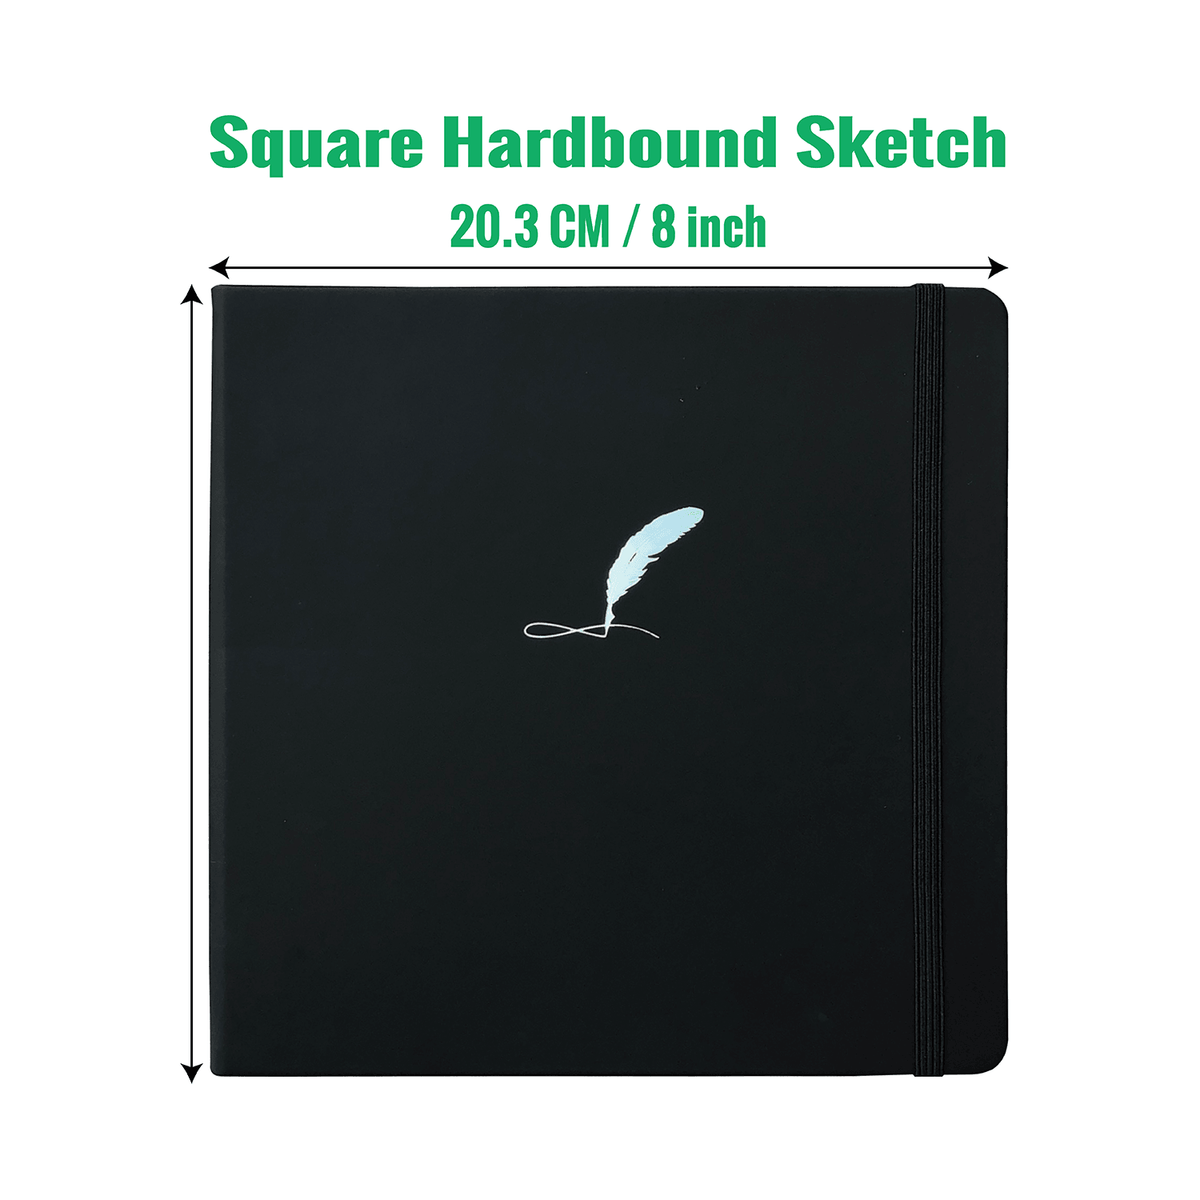 Square Hardbound Sketchbook 8x8 Inch Faux PU Leather Cover Journal